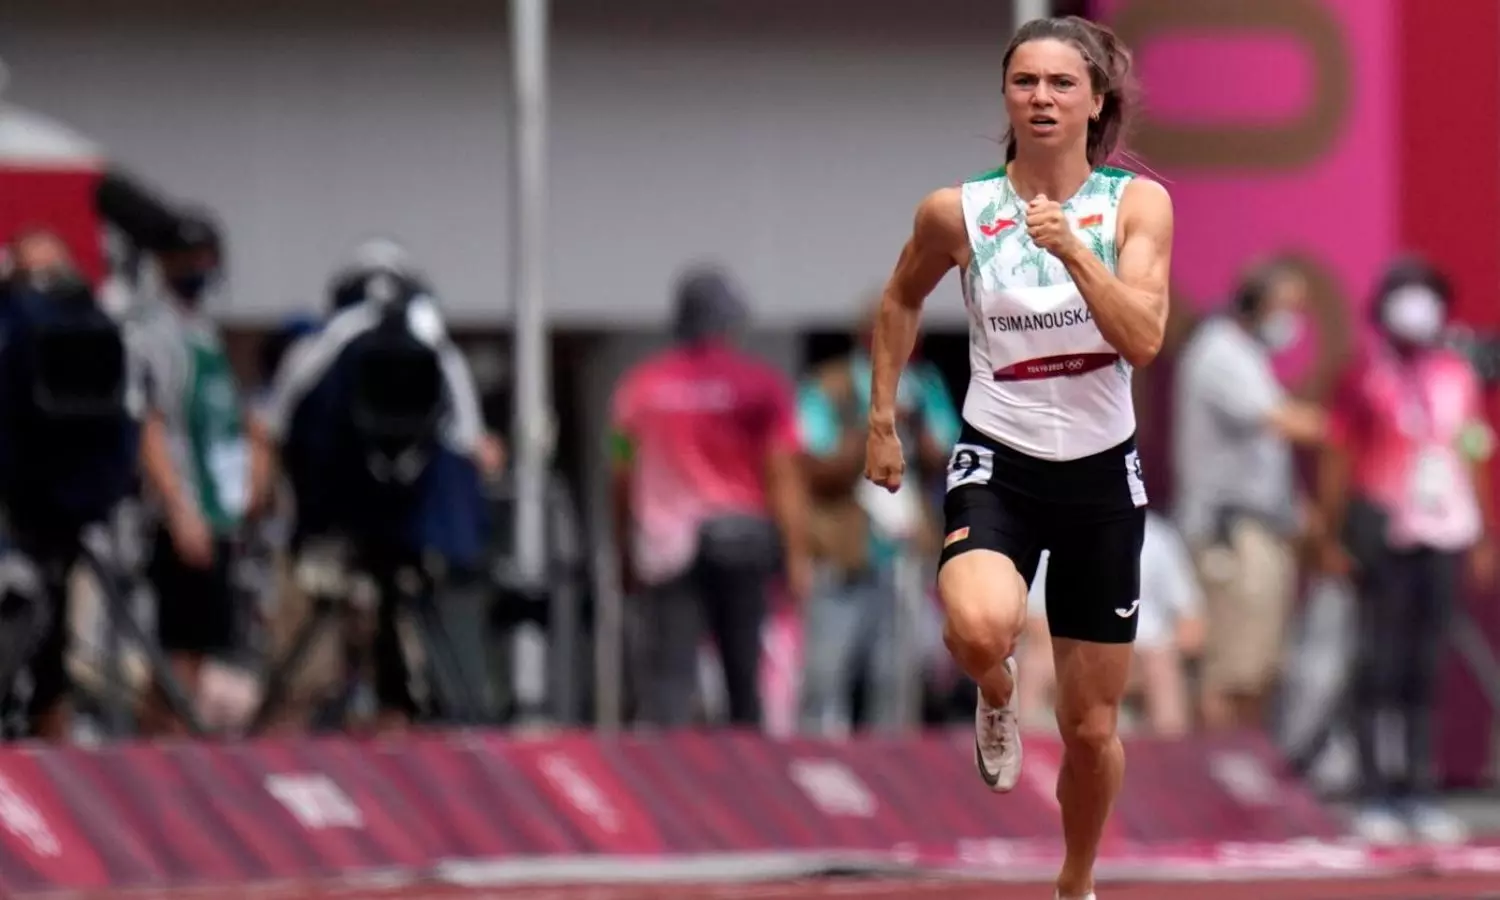 Belarus runner alleges Olympic team tried to send her home